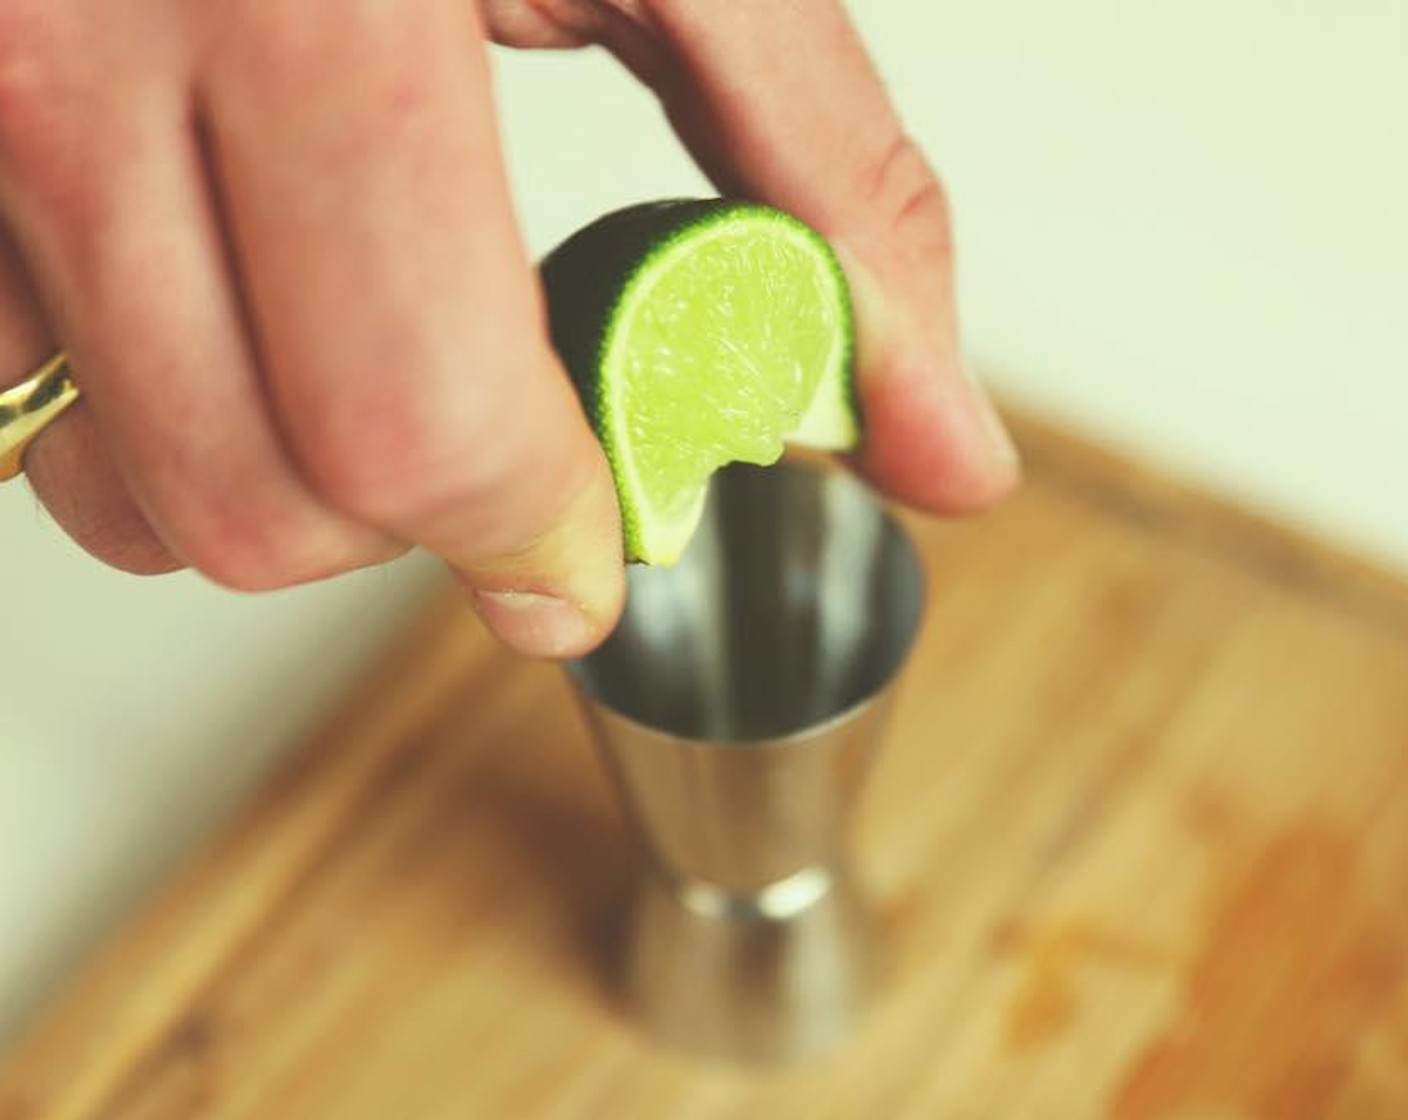 step 2 Add the juice of half the lime to the Jigger (metal cup shaped like a shot glass).